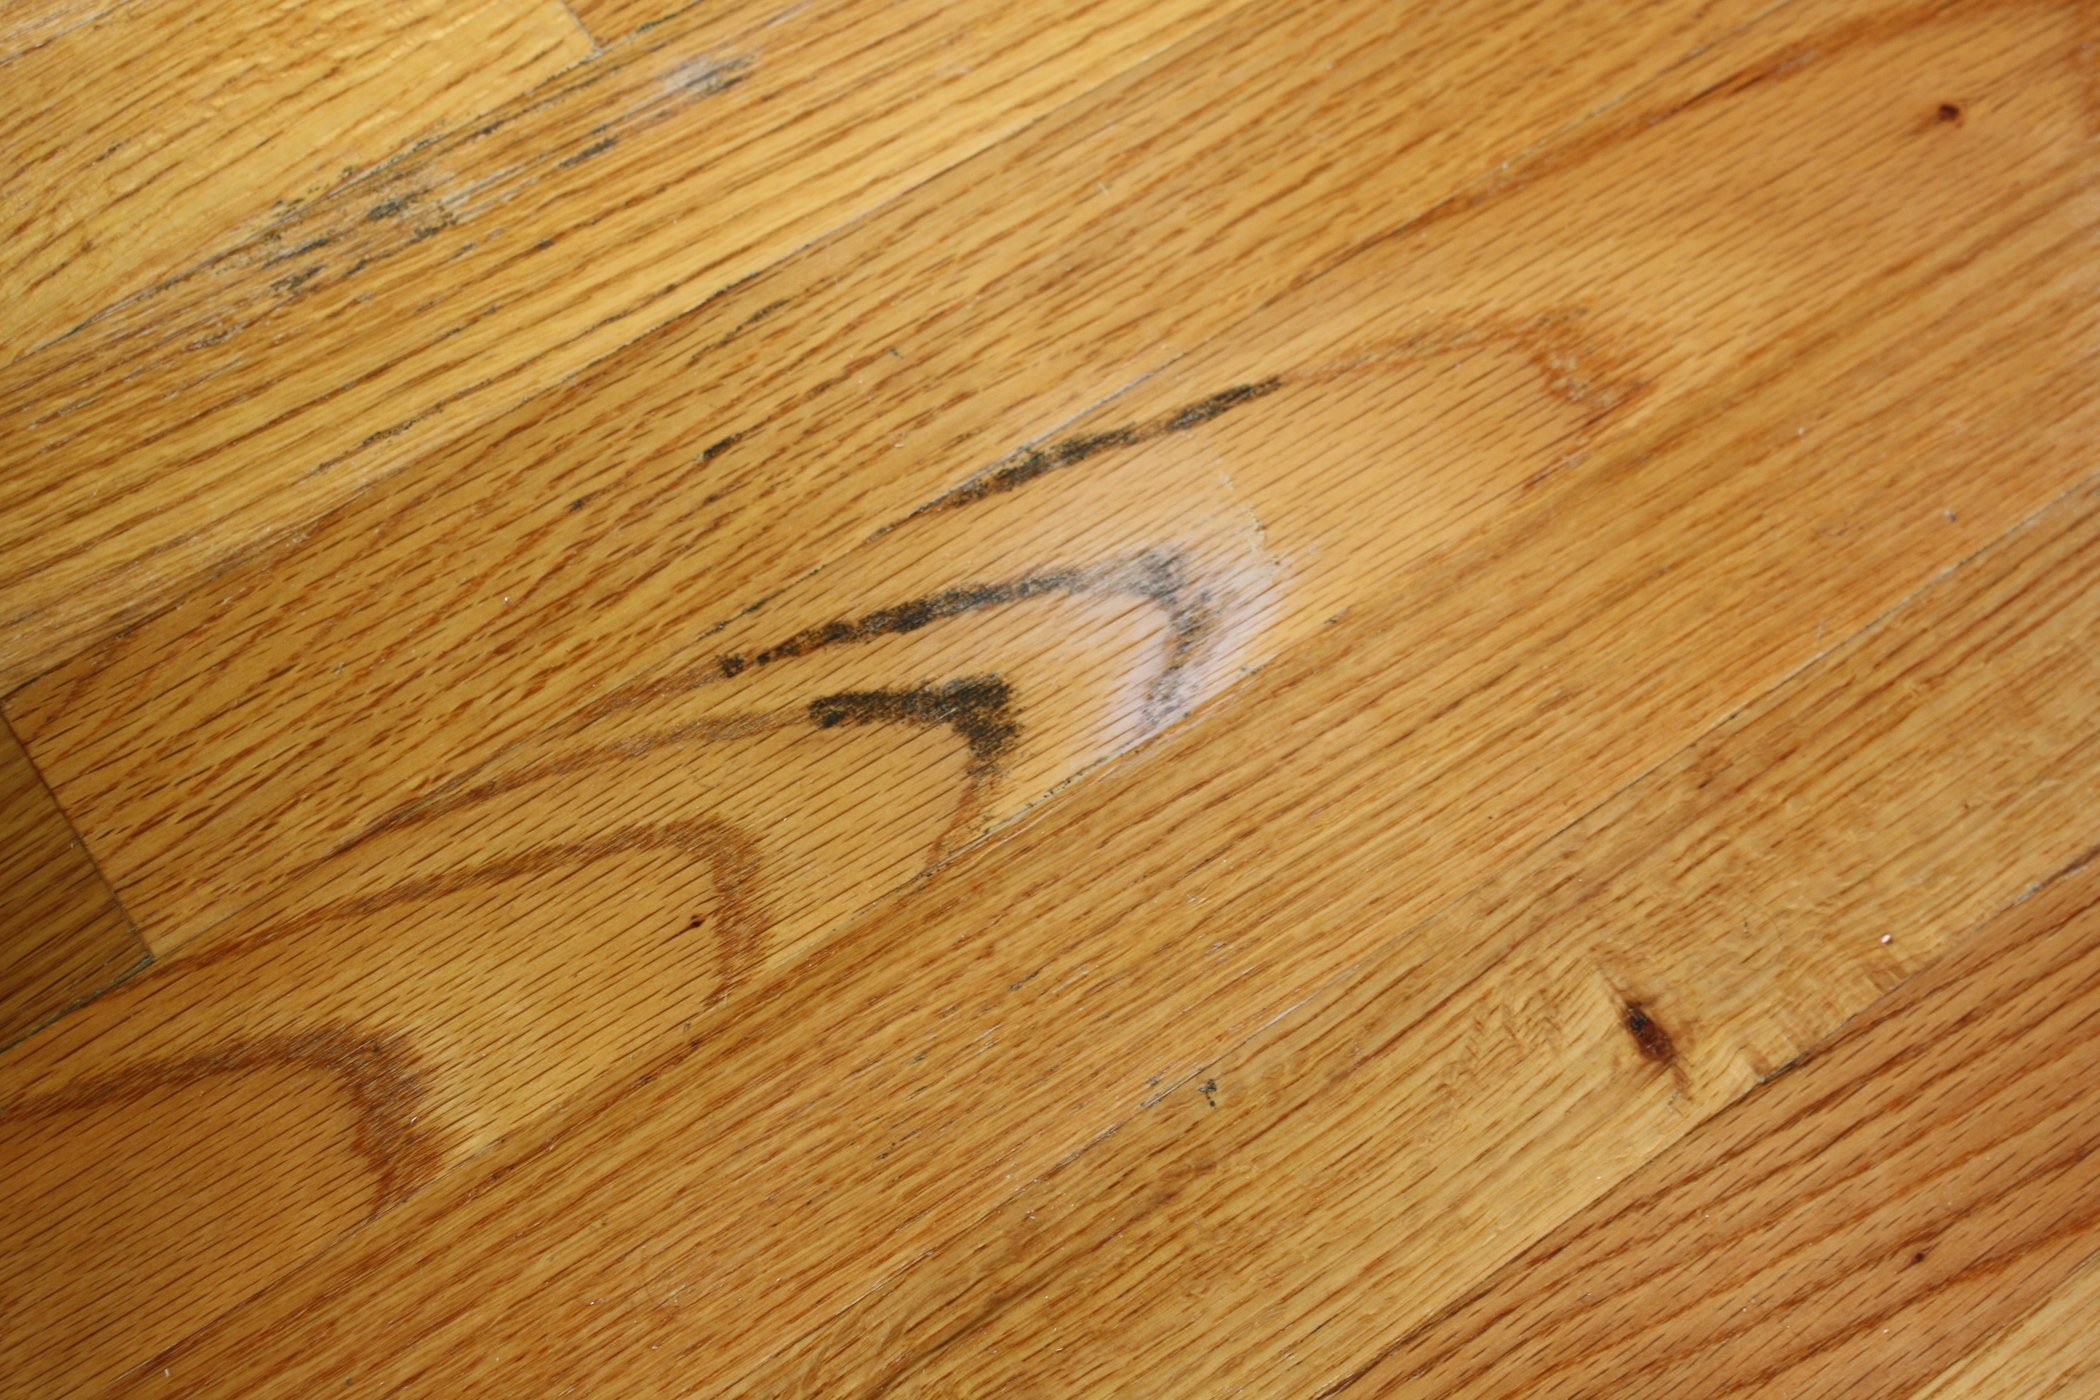 laminate flooring vs hardwood price of how to clean mold from a wood floor 4 steps throughout fylcmqyg7dyp6ds